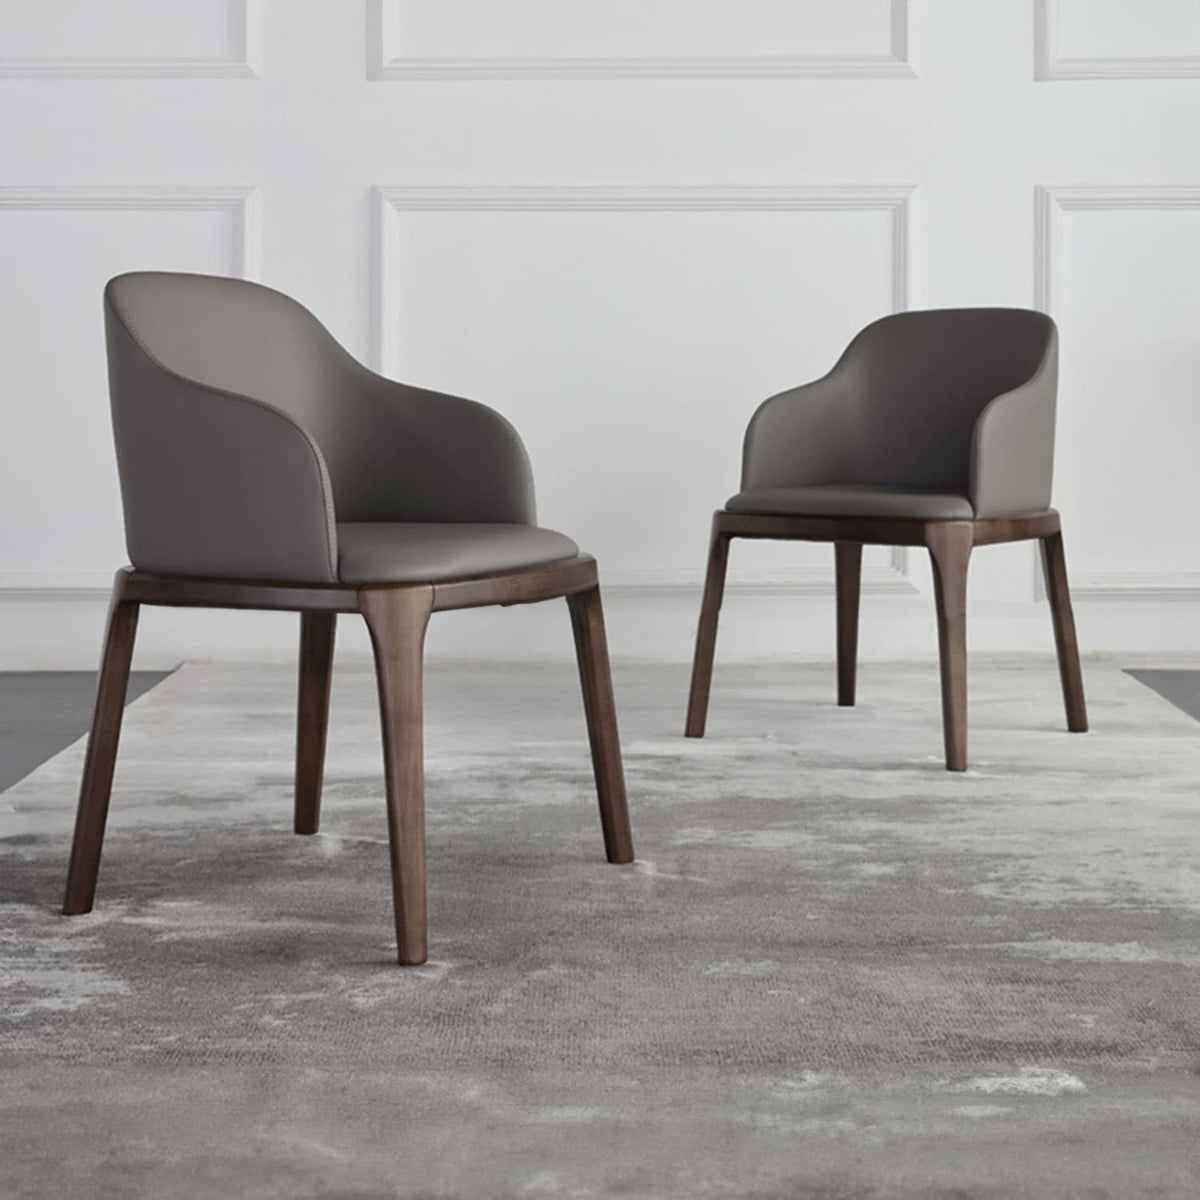 Elegant Dark Gray Ash Wood Chair with Scratch-Resistant Fabric - Perfect for Modern Living Rooms hagst-328